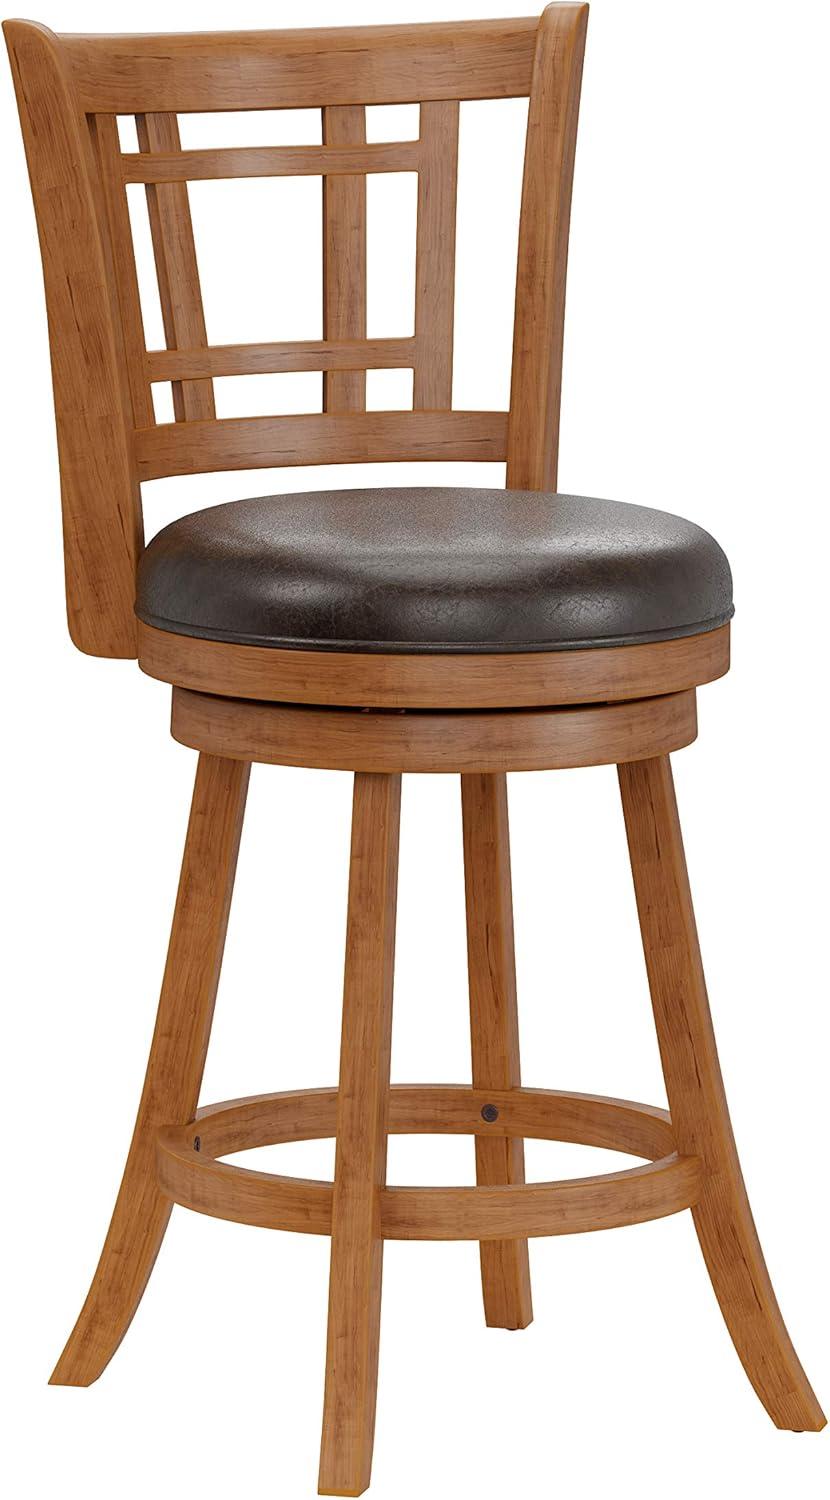 Fairfox Oak Swivel Counter Stool with Brown Faux Leather Seat